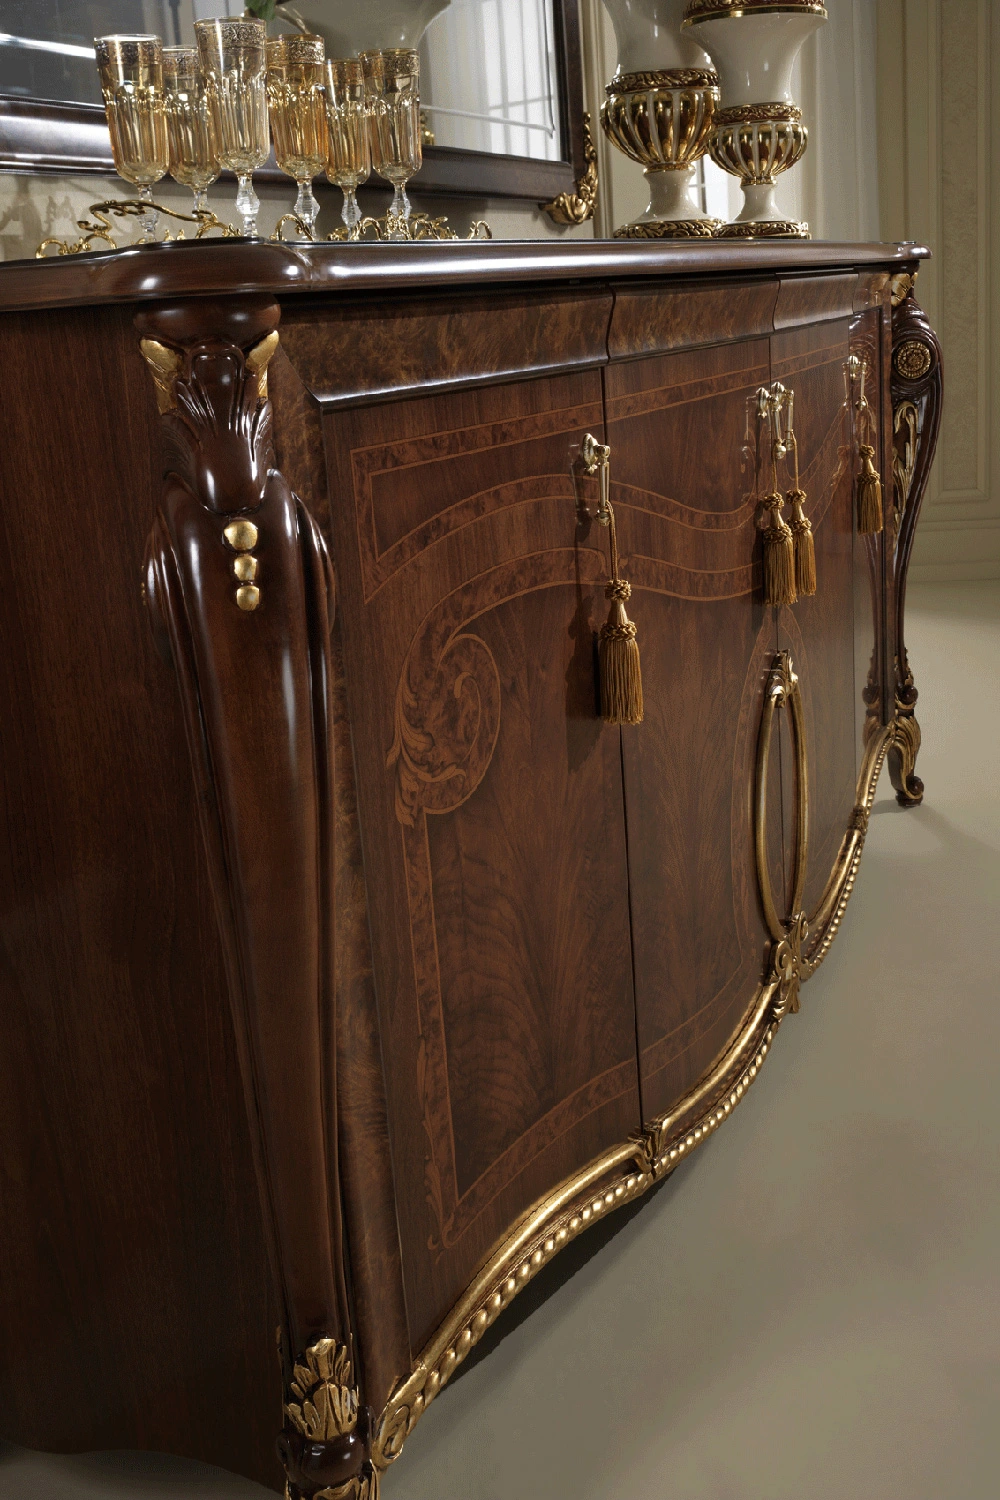 Arredoclassic™ - Donatello 4 Door Buffet. Color: Brown/Gold, Width: 82", Depth: 22", Height: 40", Weight: 279 lbs, Material: Wood veneer, MDF, Finish: High Gloss Lacquer